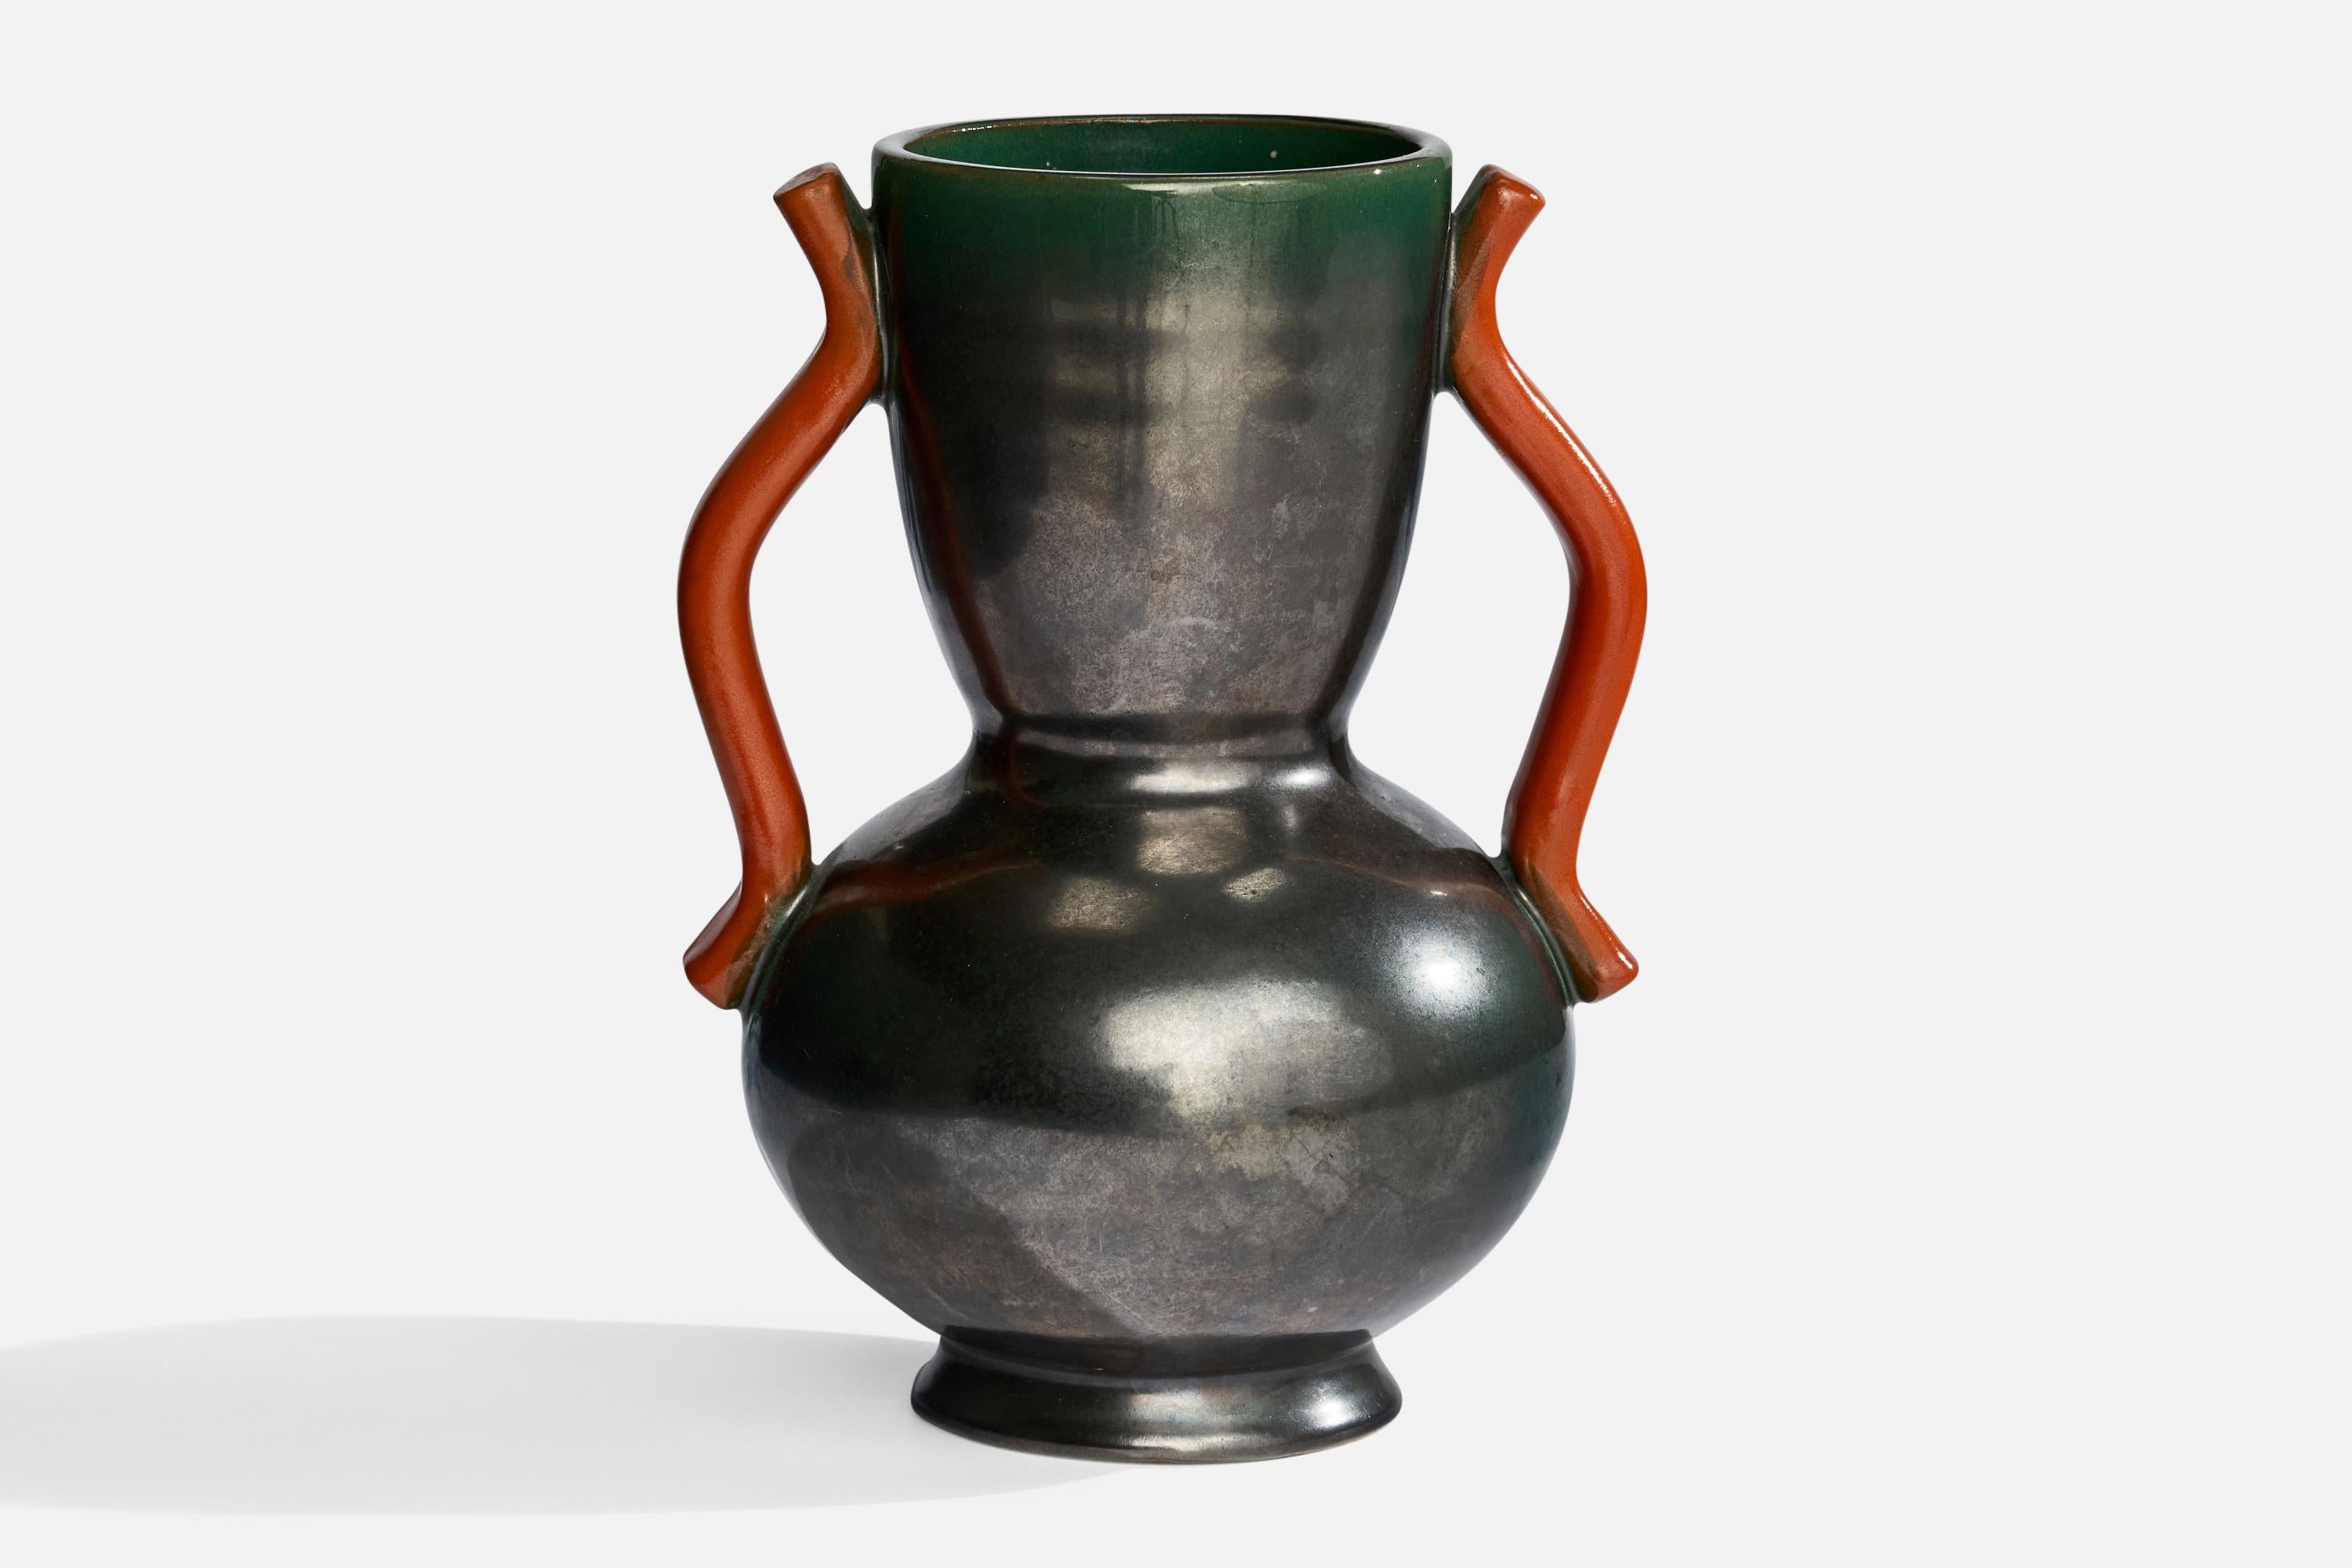 An orange and green-glazed earthenware vase designed by Anna-Lisa Thomson and produced by Upsala Ekeby, Sweden, 1930s.